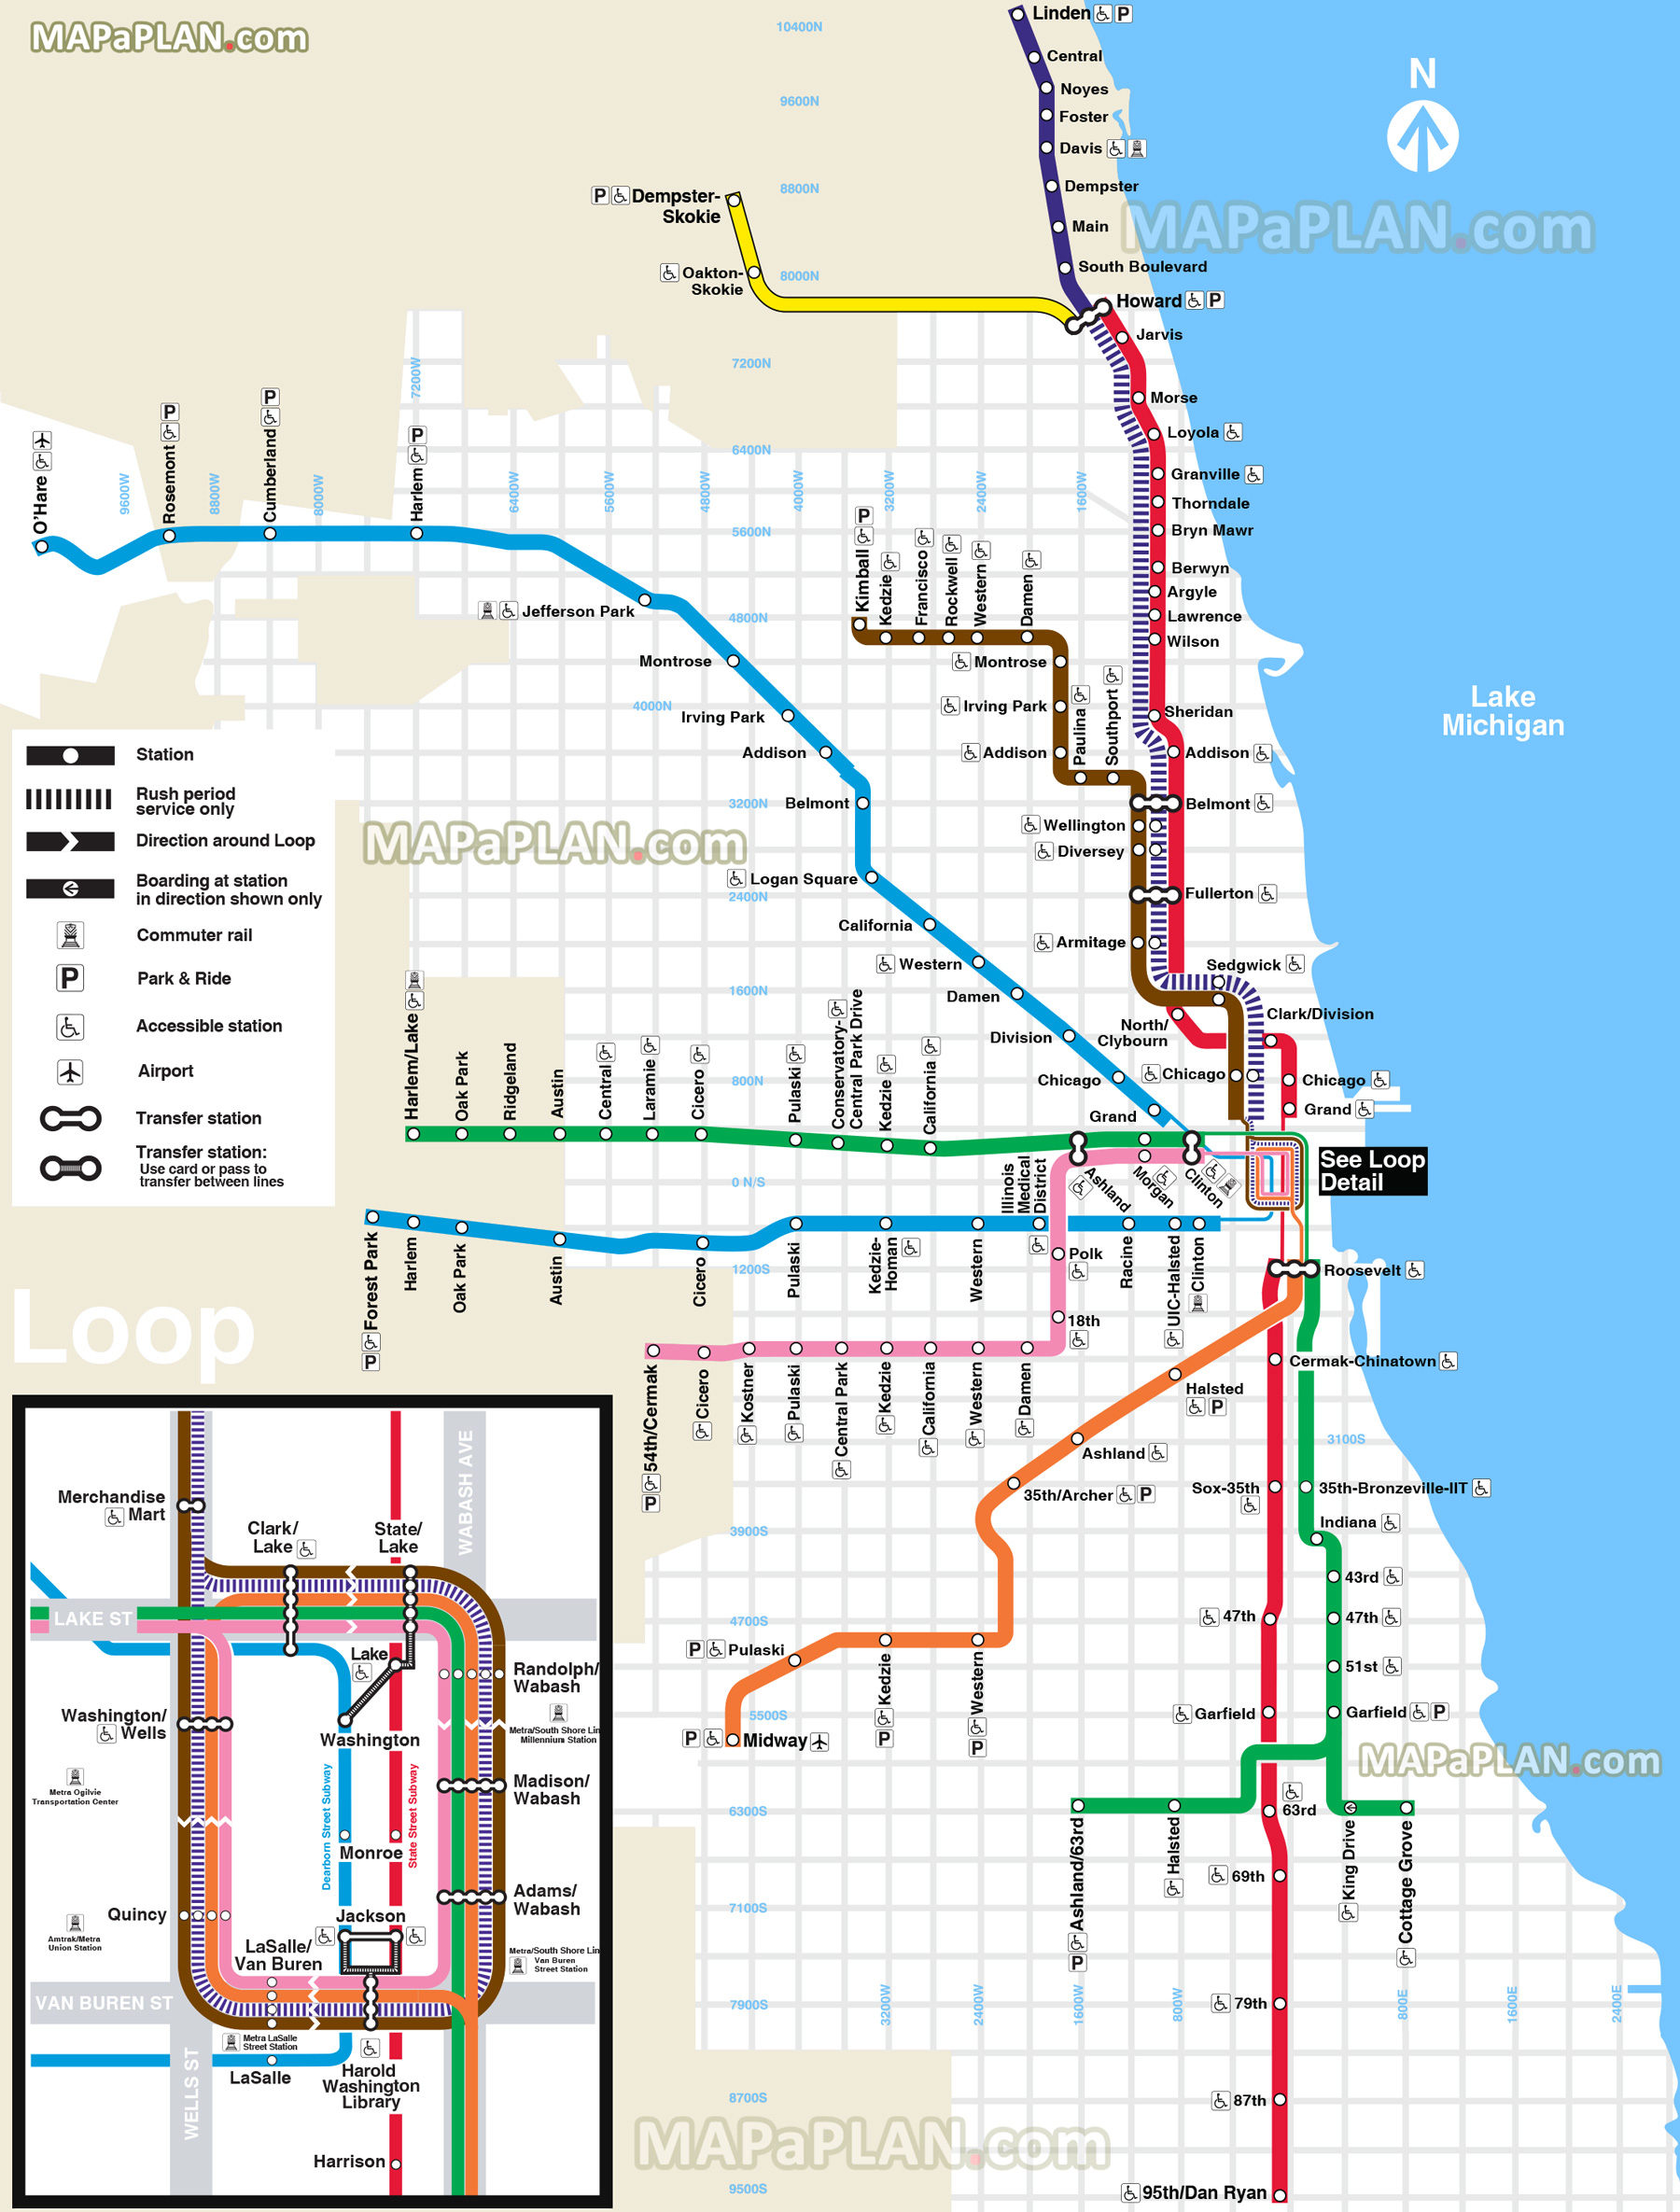 el l train subway metro tube underground blue red brown pink orange purple yellow lines stations cta public transportation railway system network O'Hare Midway airport terminal Chicago top tourist attractions map